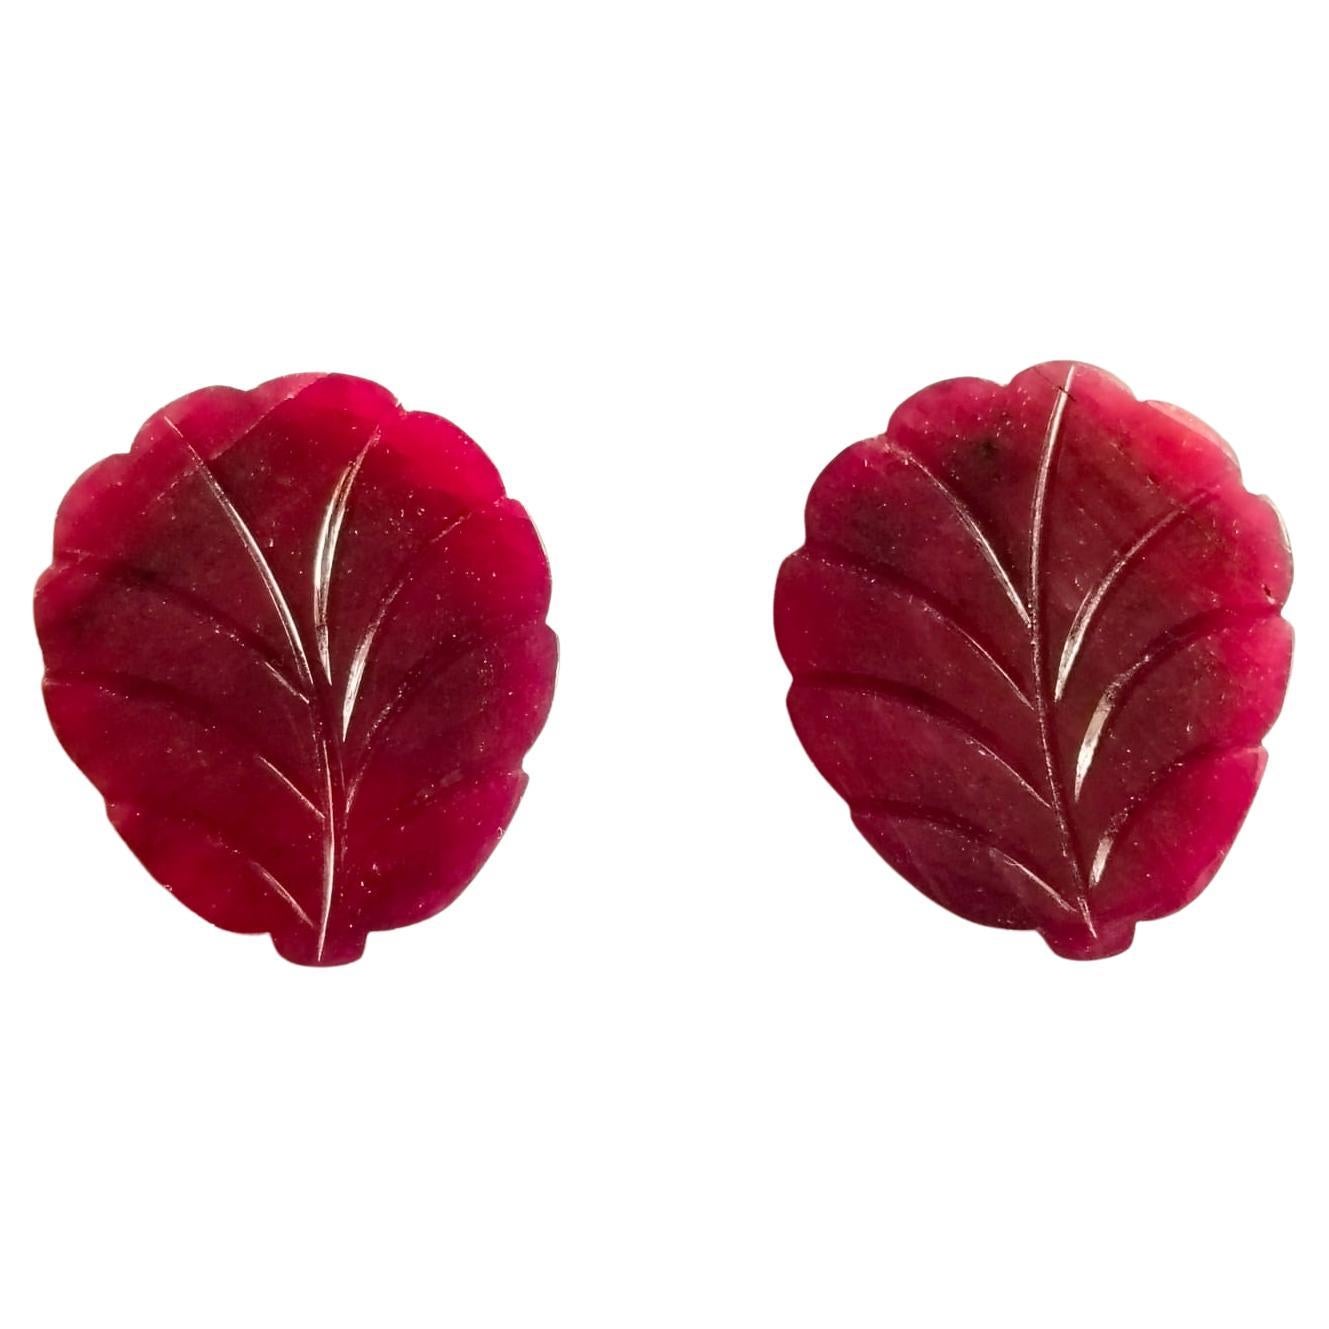 Natural Ruby Carving Leaf Pair Gemstone.
25.14 Carat with a elegant Red color and excellent clarity. Also has an excellent fancy Carving Leaf with ideal polish to show great shine and color . It will look authentic in jewelry. The dimensions of the